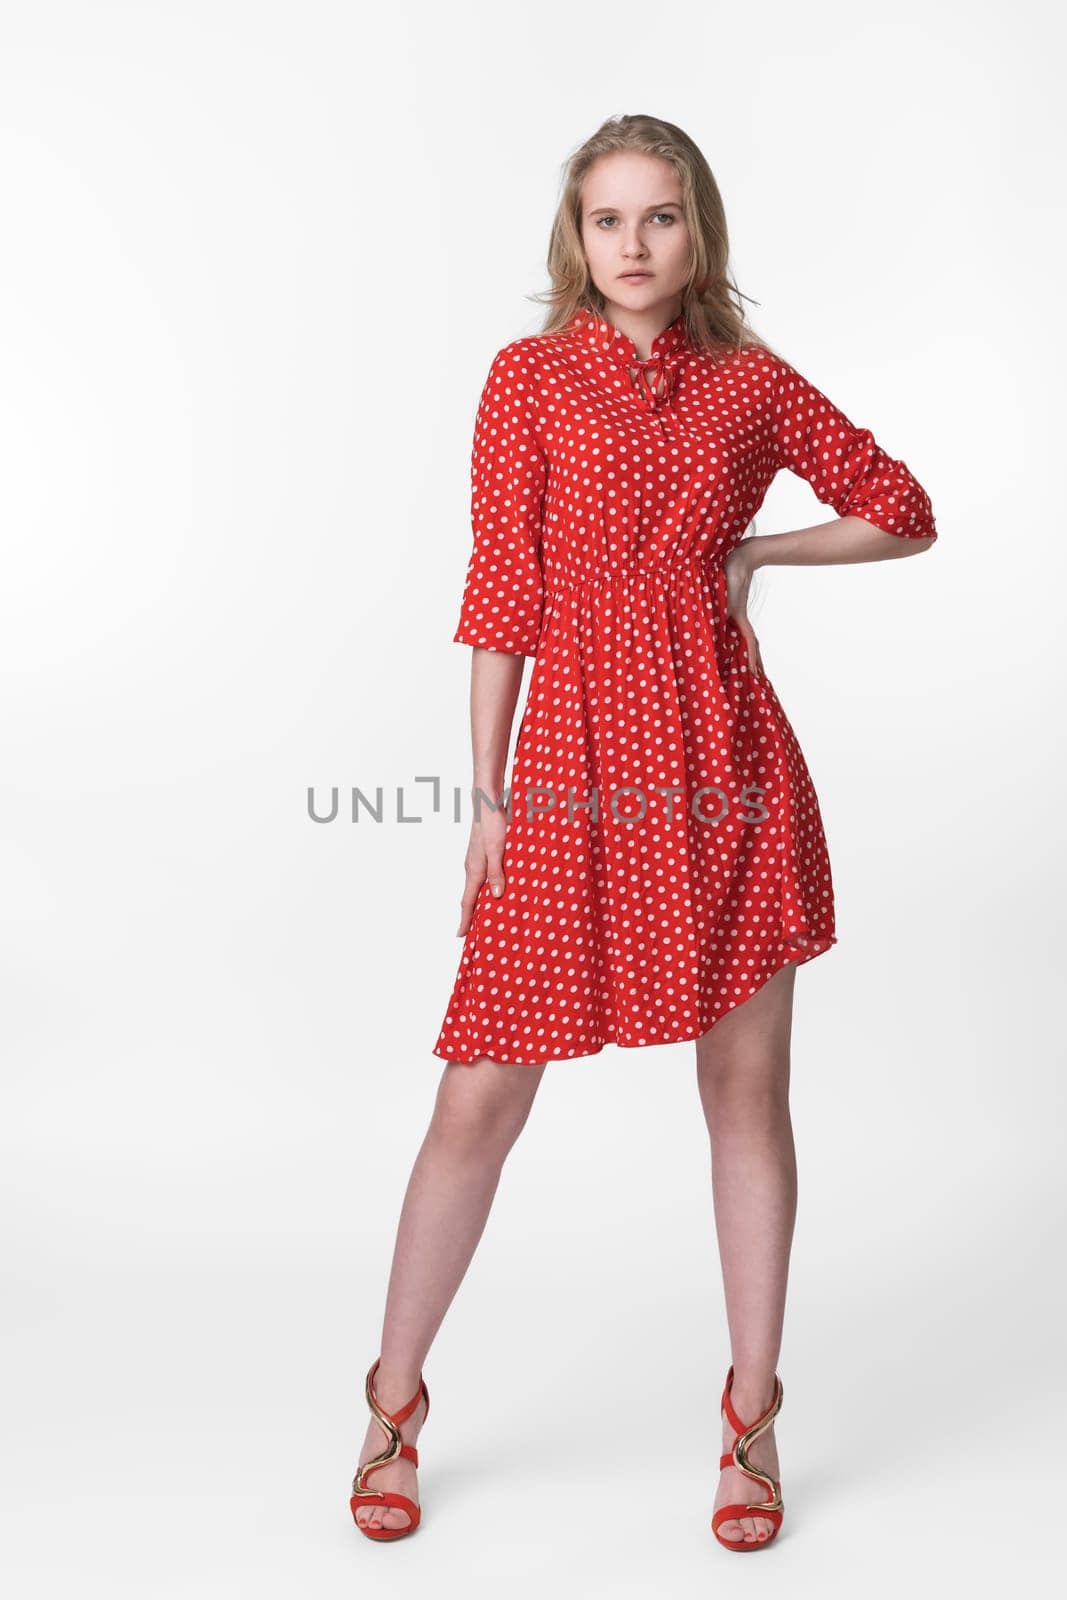 Fashionable female dressed in red polka dot dress, red shoes standing in full length and poses by Alexander-Piragis